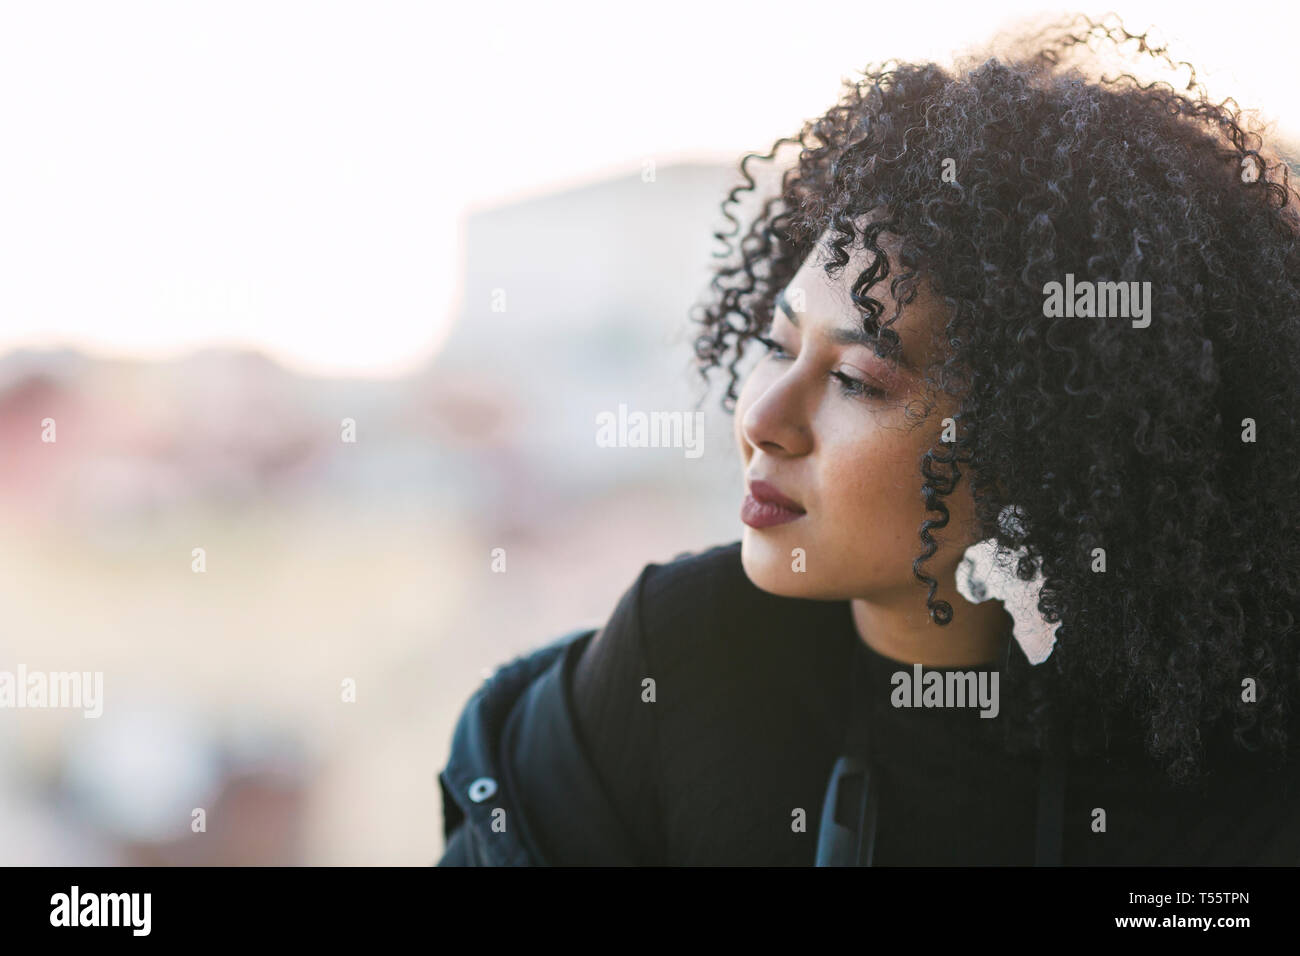 Portrait of young woman with curly black hair Stock Photo